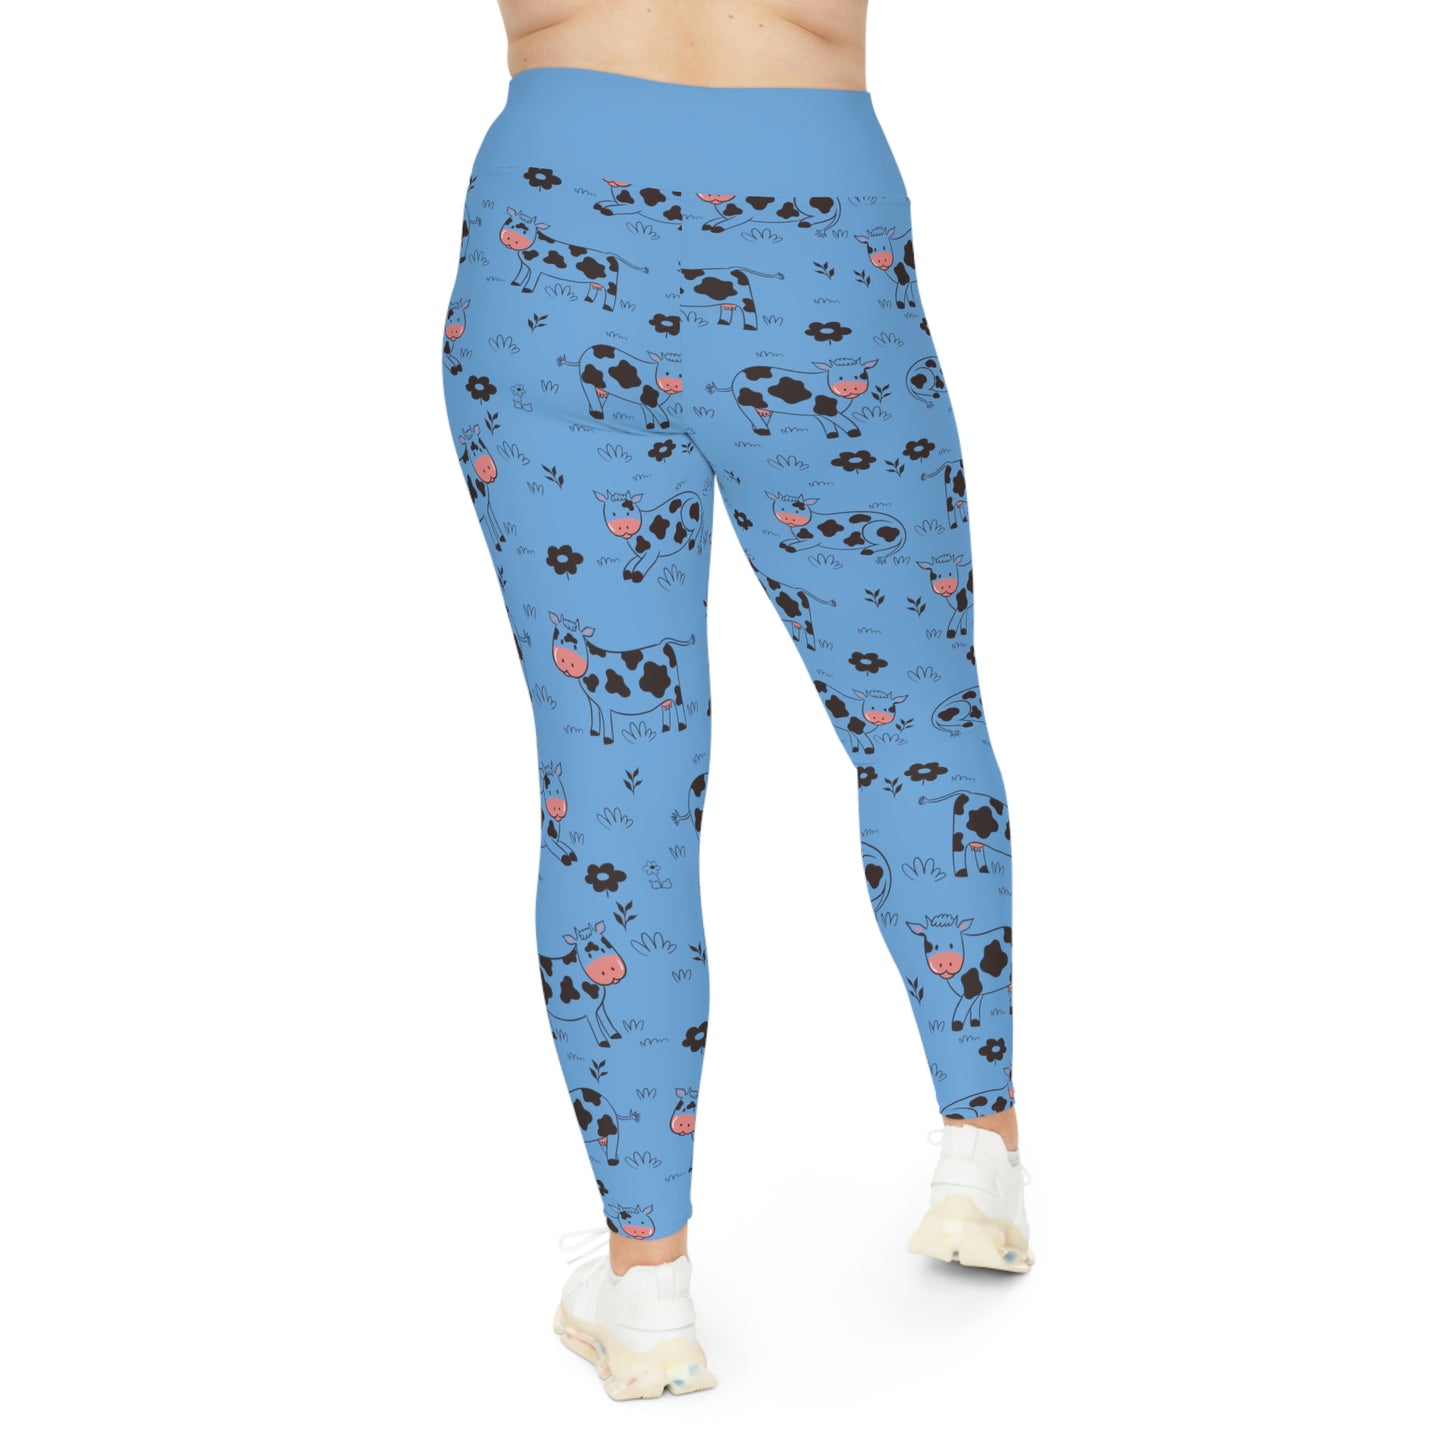 Cow Farm animal Plus Size Leggings One of a Kind Unique Workout Activewear tights for Mom fitness, Mothers Day, Girlfriend Christmas Gift